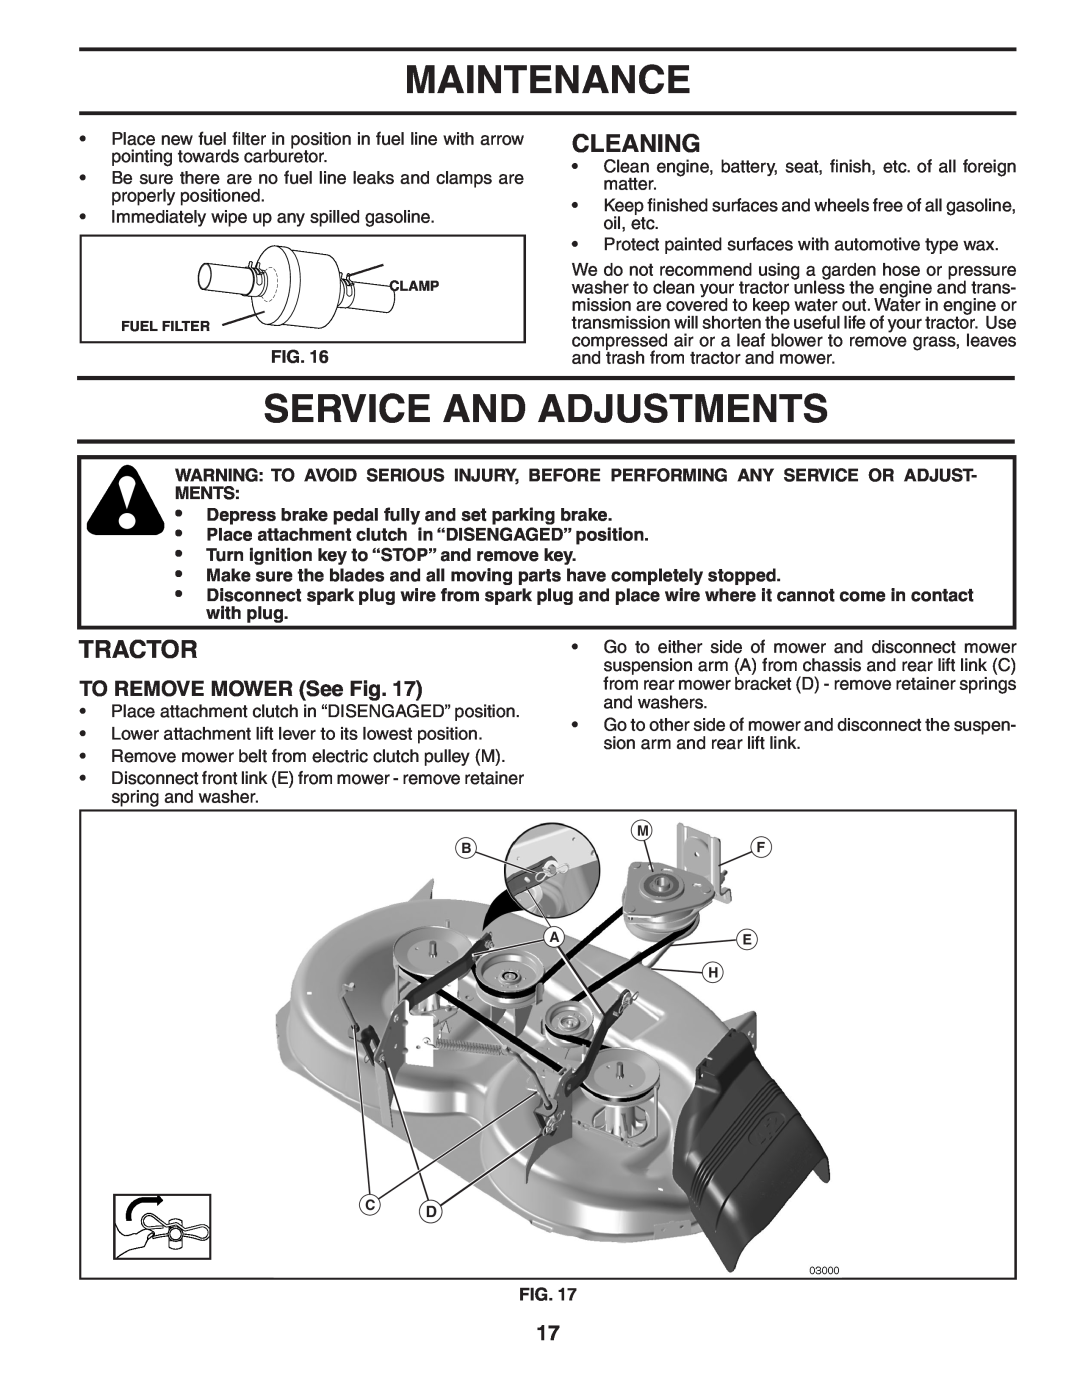 Husqvarna YTH2042XP owner manual Service And Adjustments, Cleaning, TO REMOVE MOWER See Fig, Maintenance, Tractor 